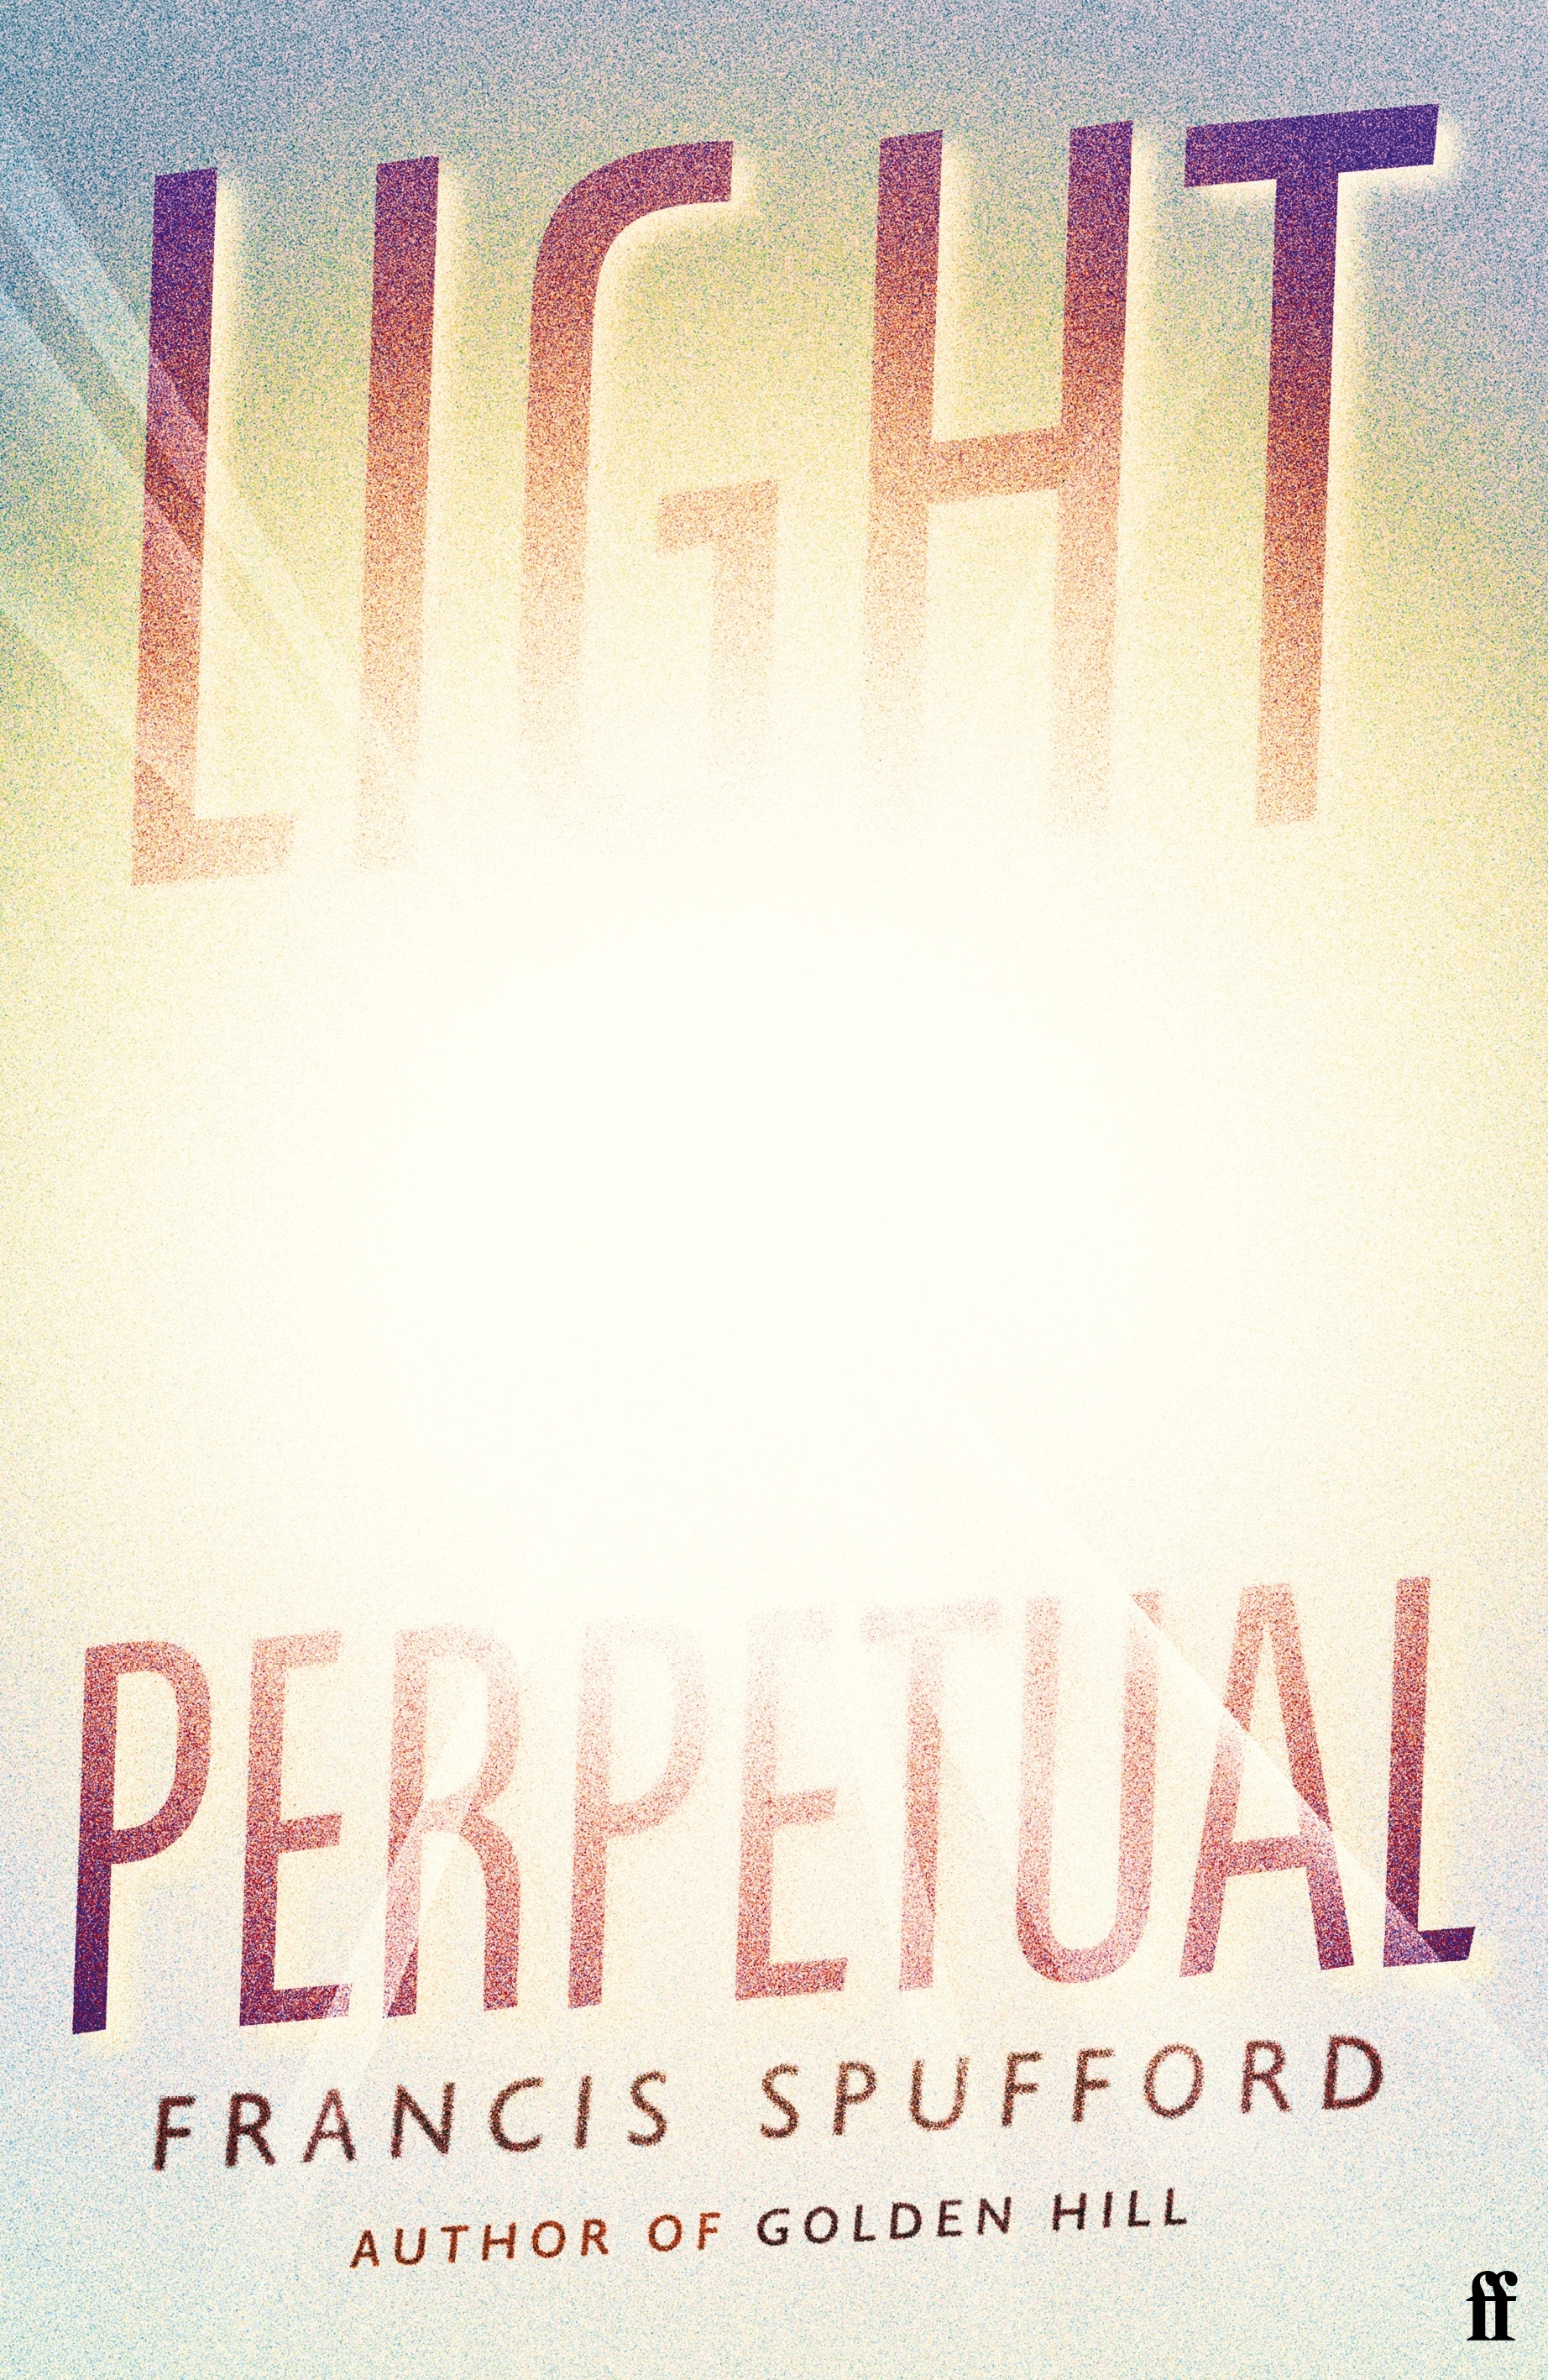 Light Perpetual | Francis Spufford